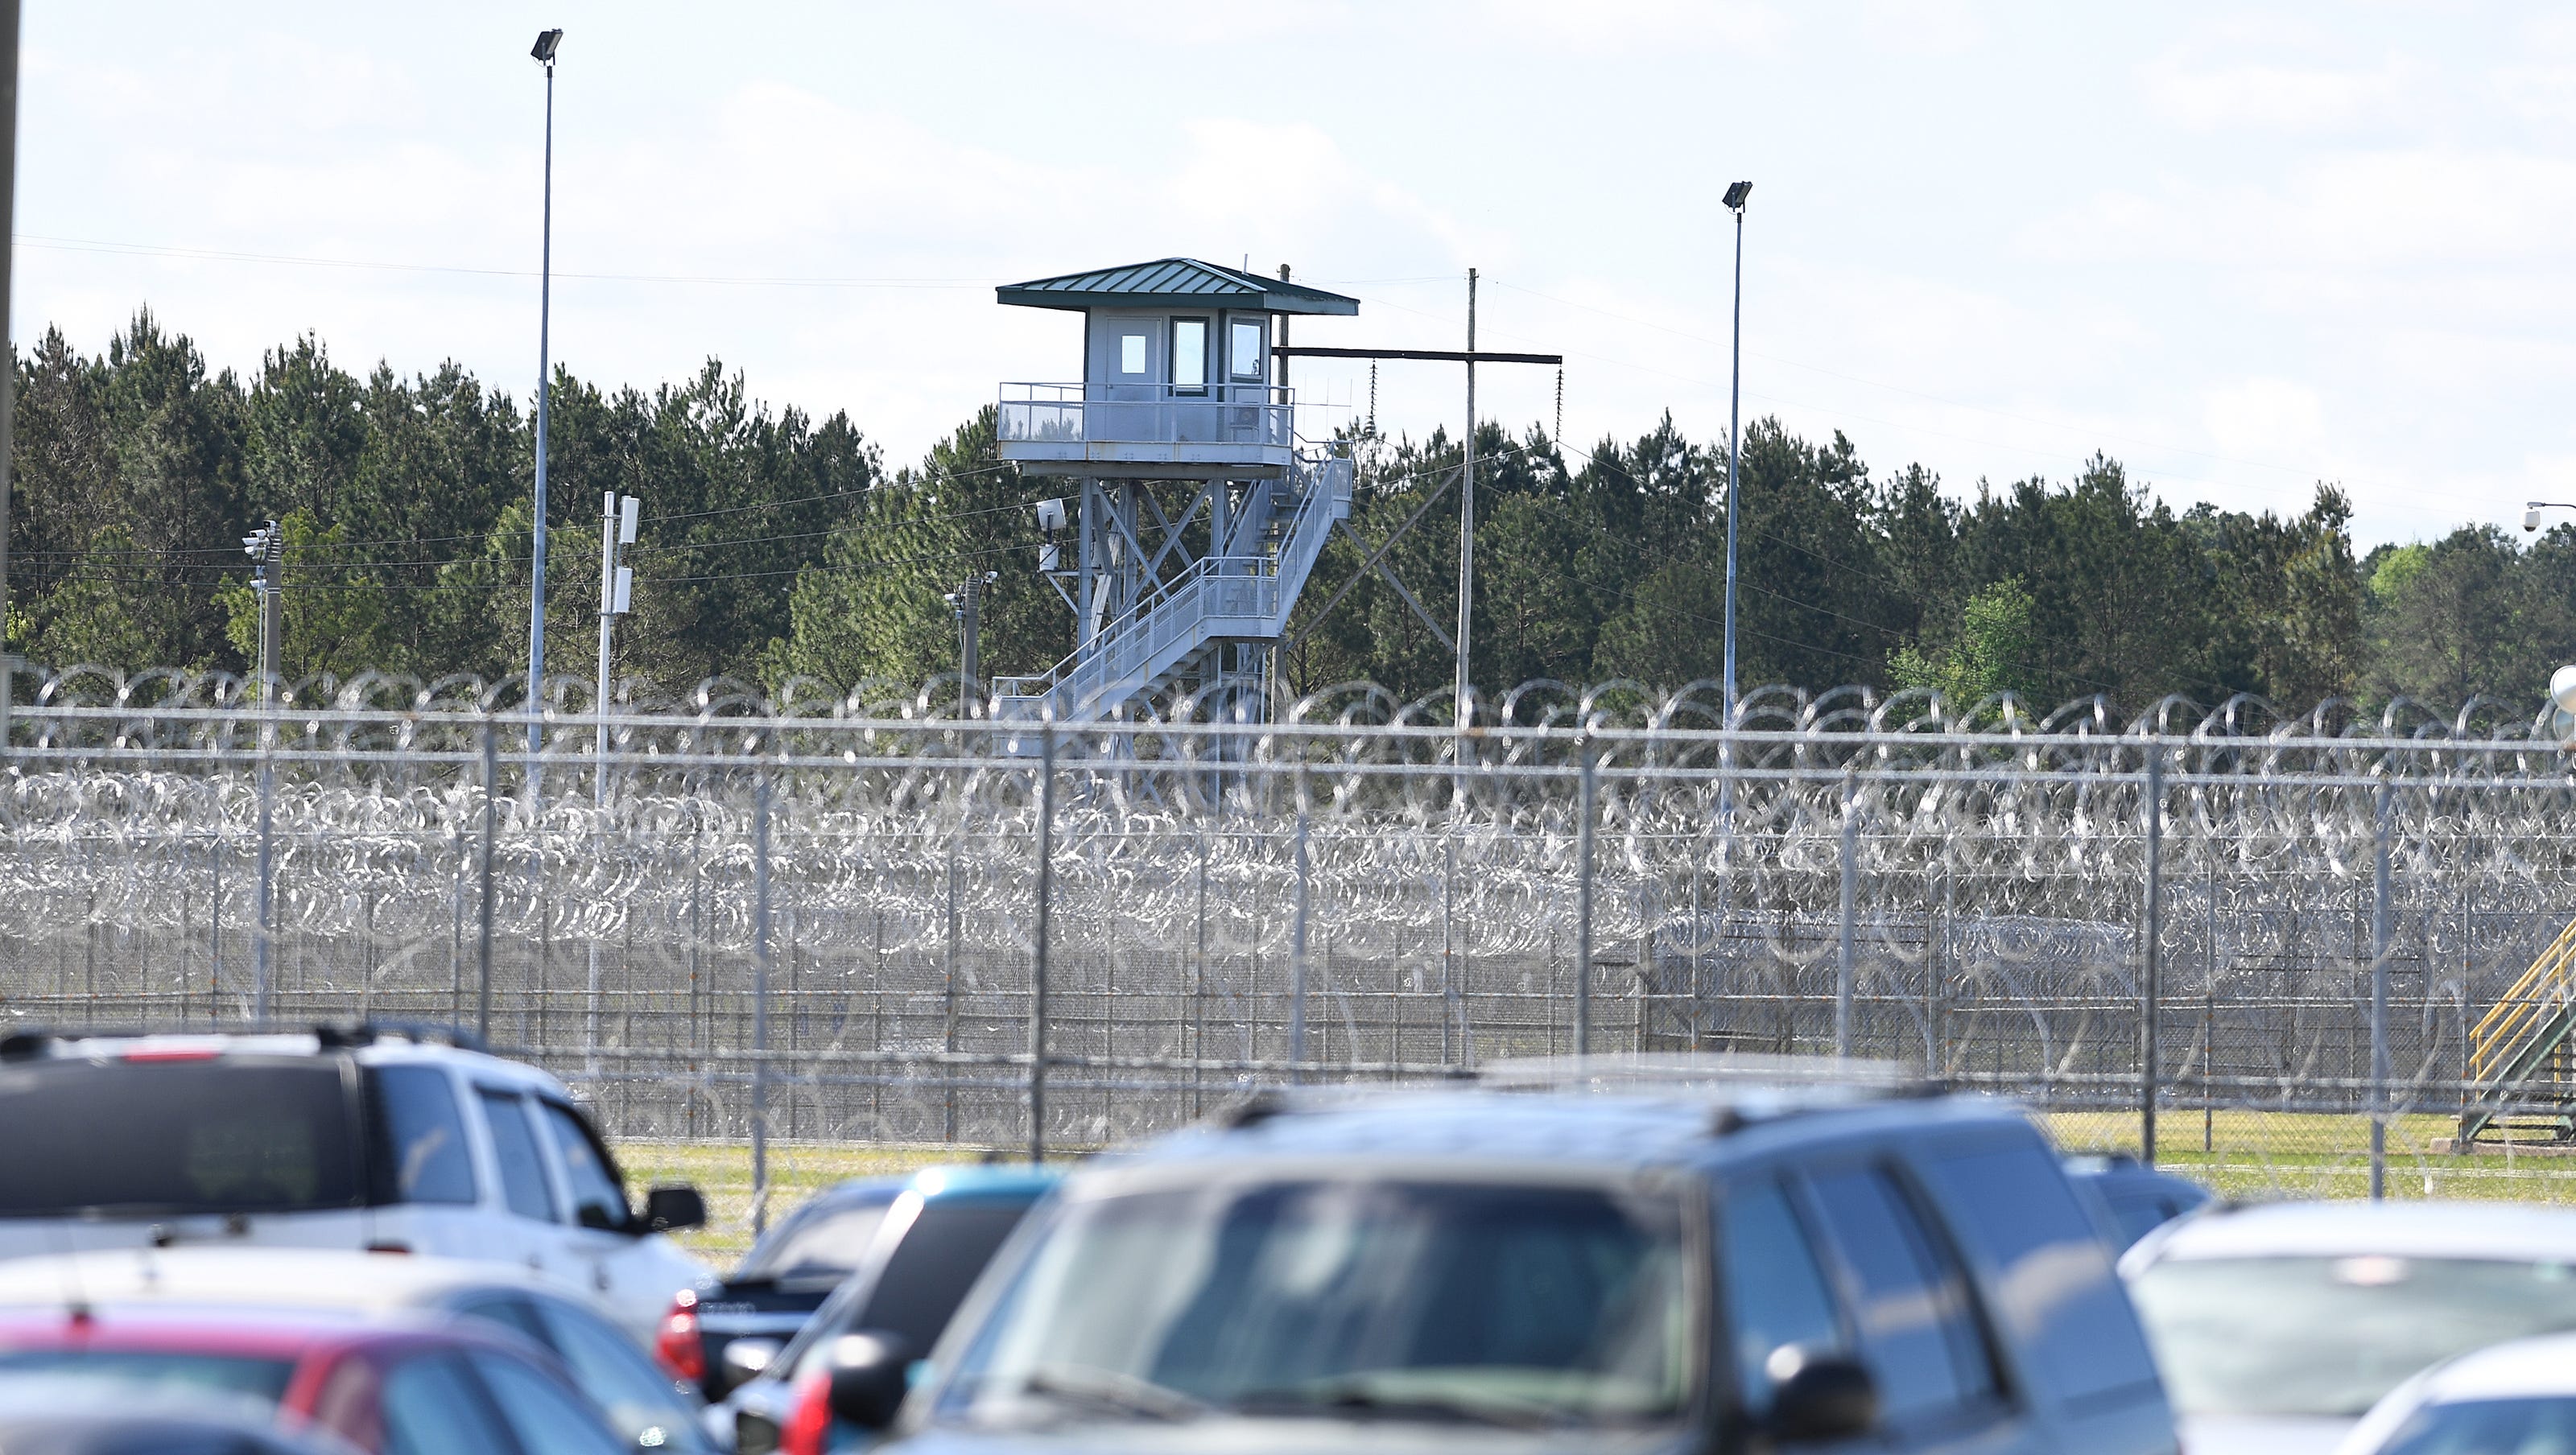 Identities of 7 killed at Lee County prison in South Carolina